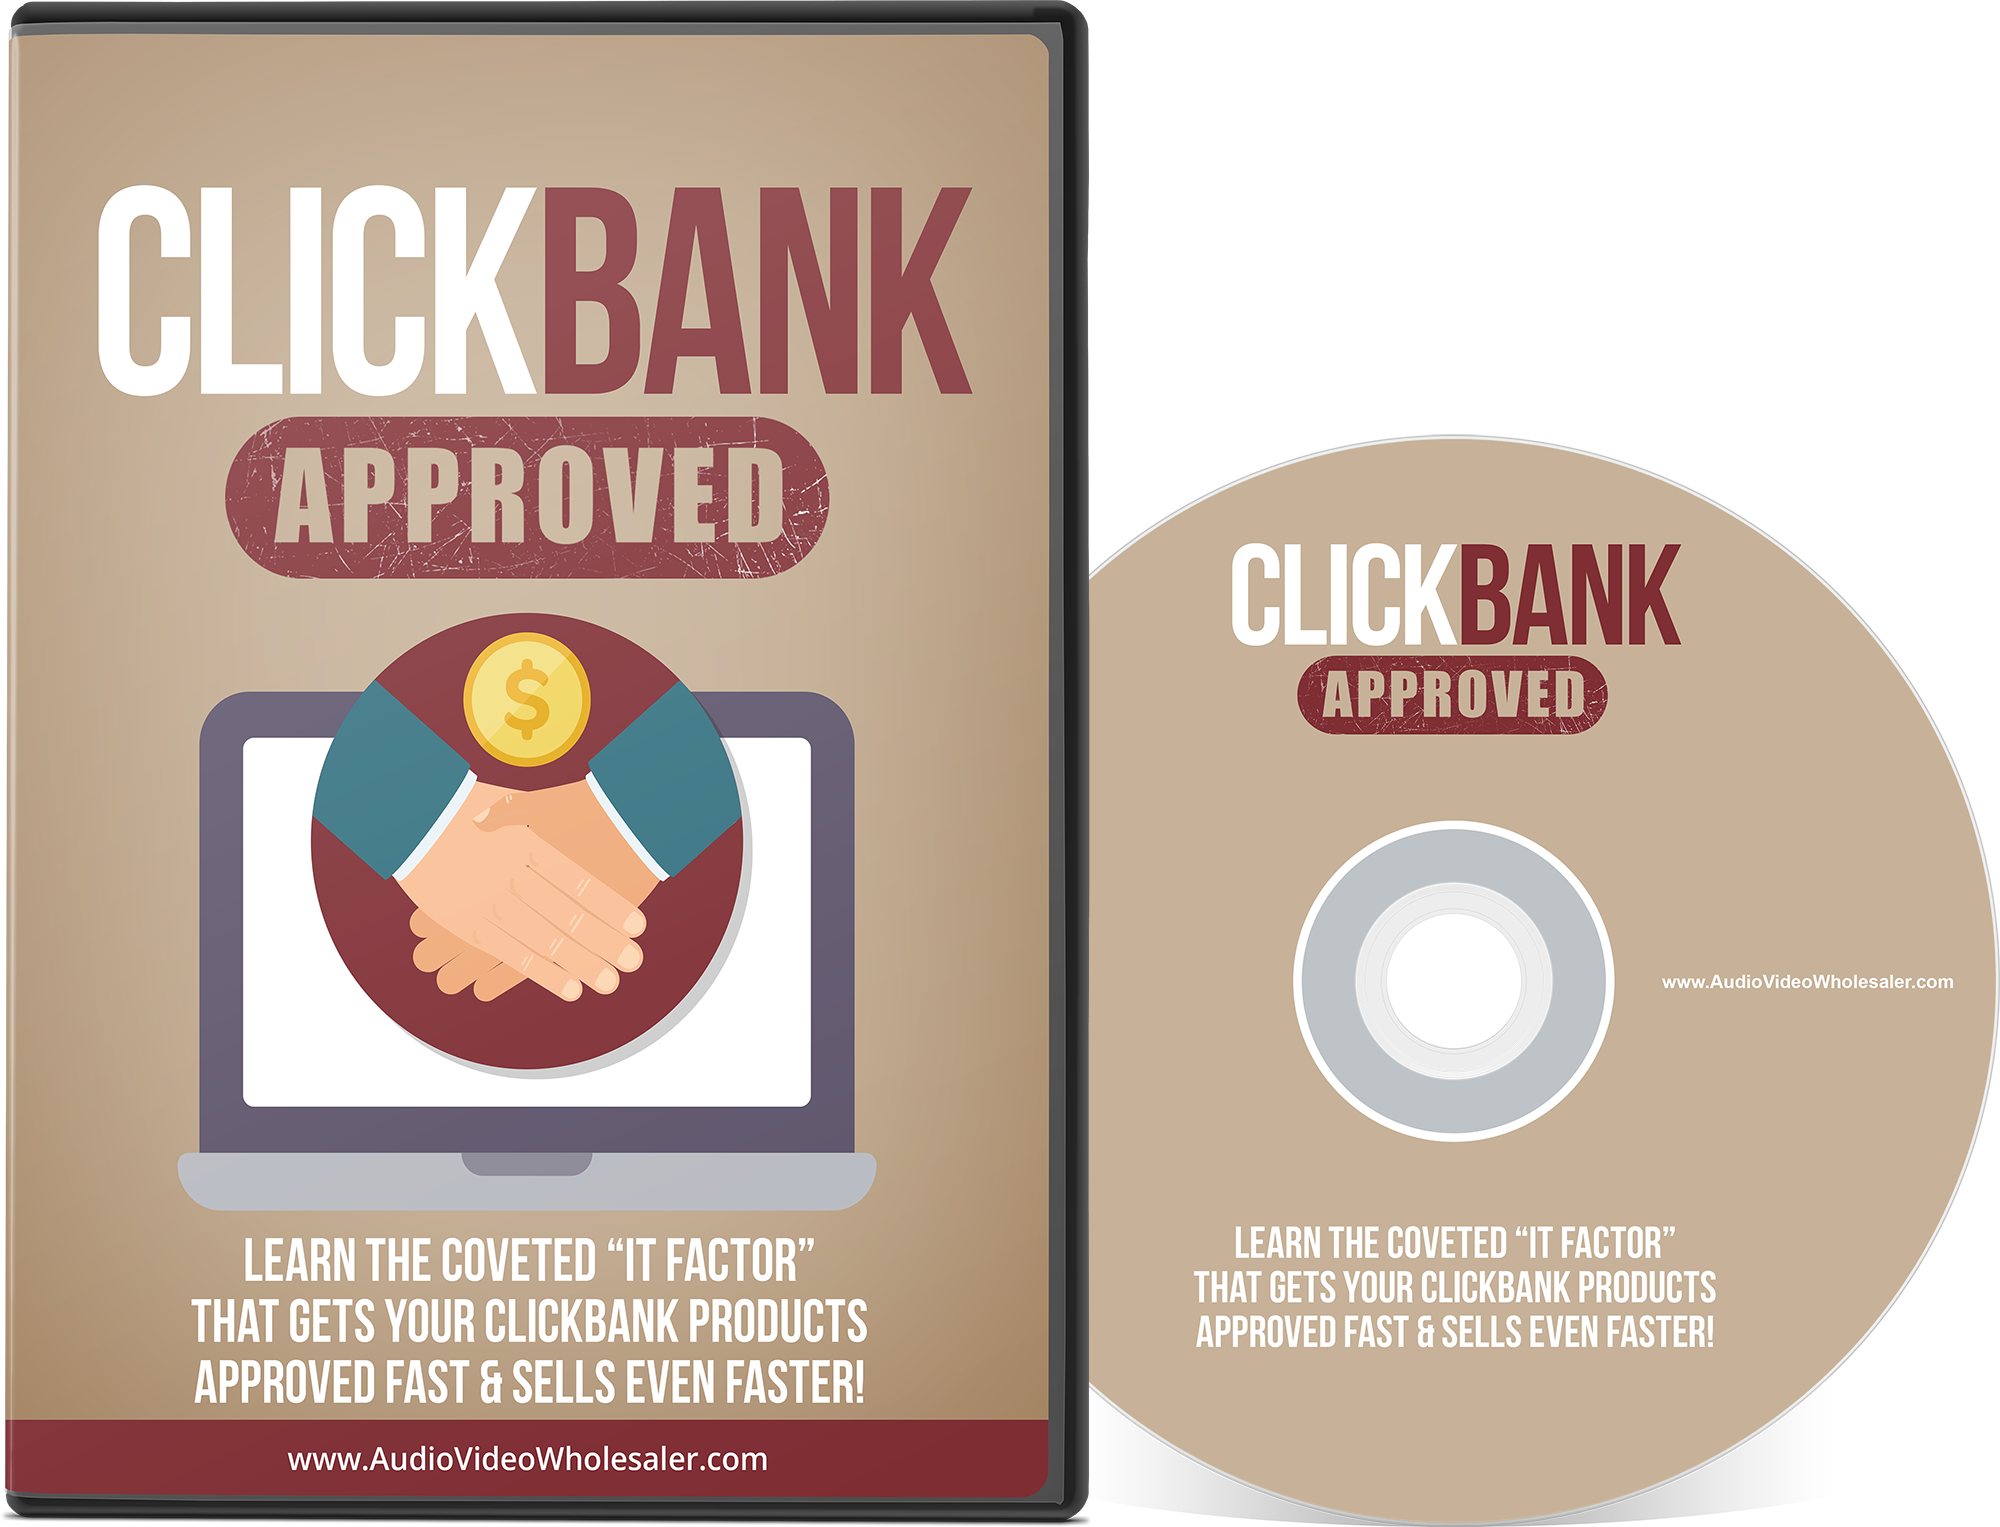 Learn To Get Your Clickbank Product Approved Fast Video Course